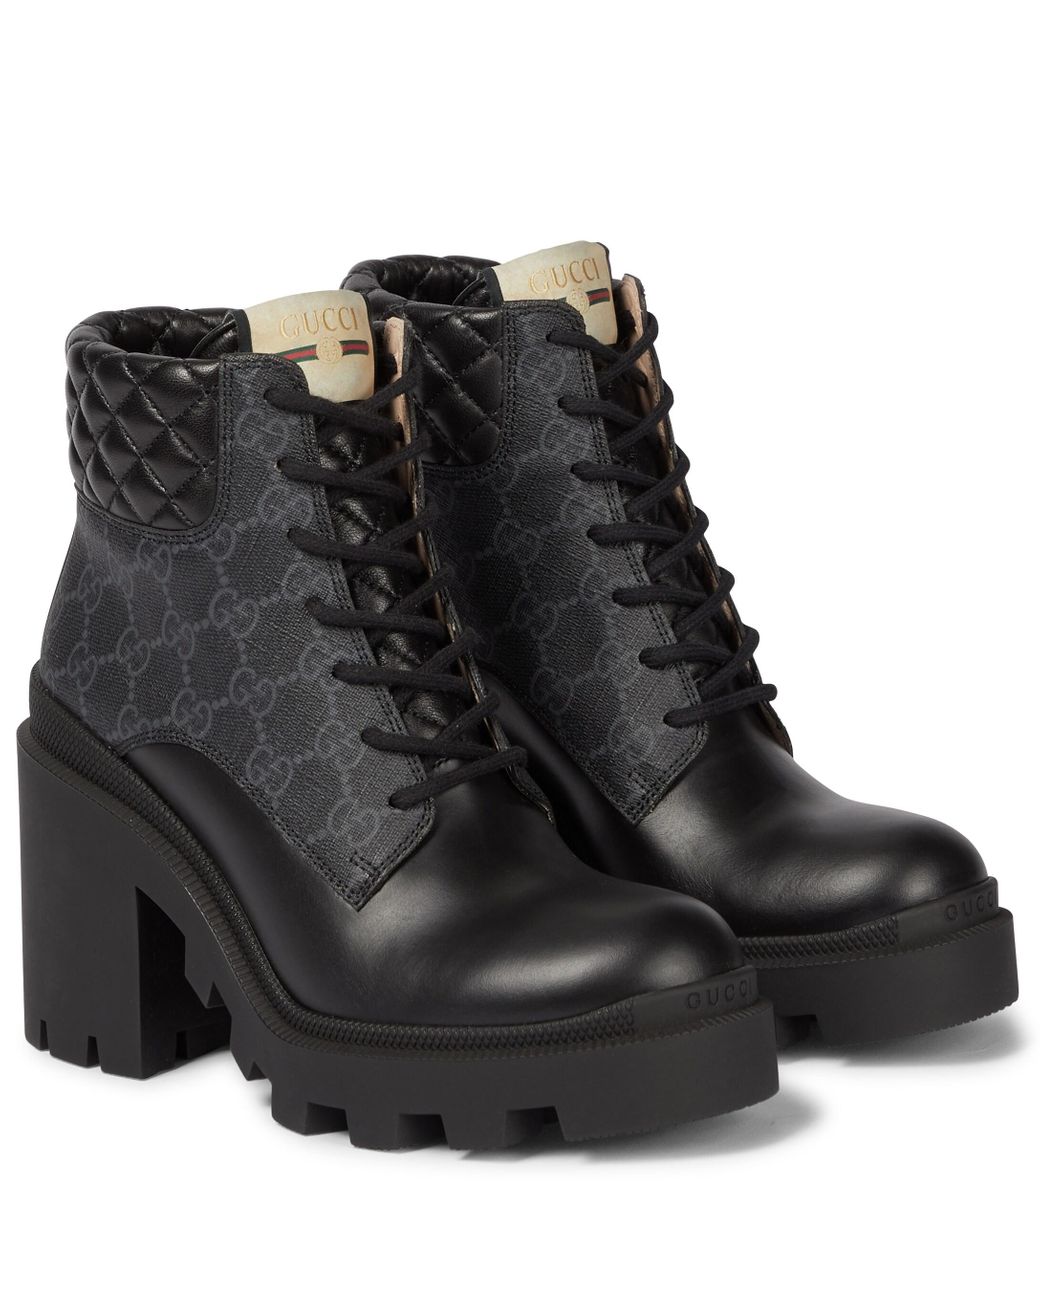 Gucci GG Canvas And Leather Lace-up Boots in Black | Lyst Canada